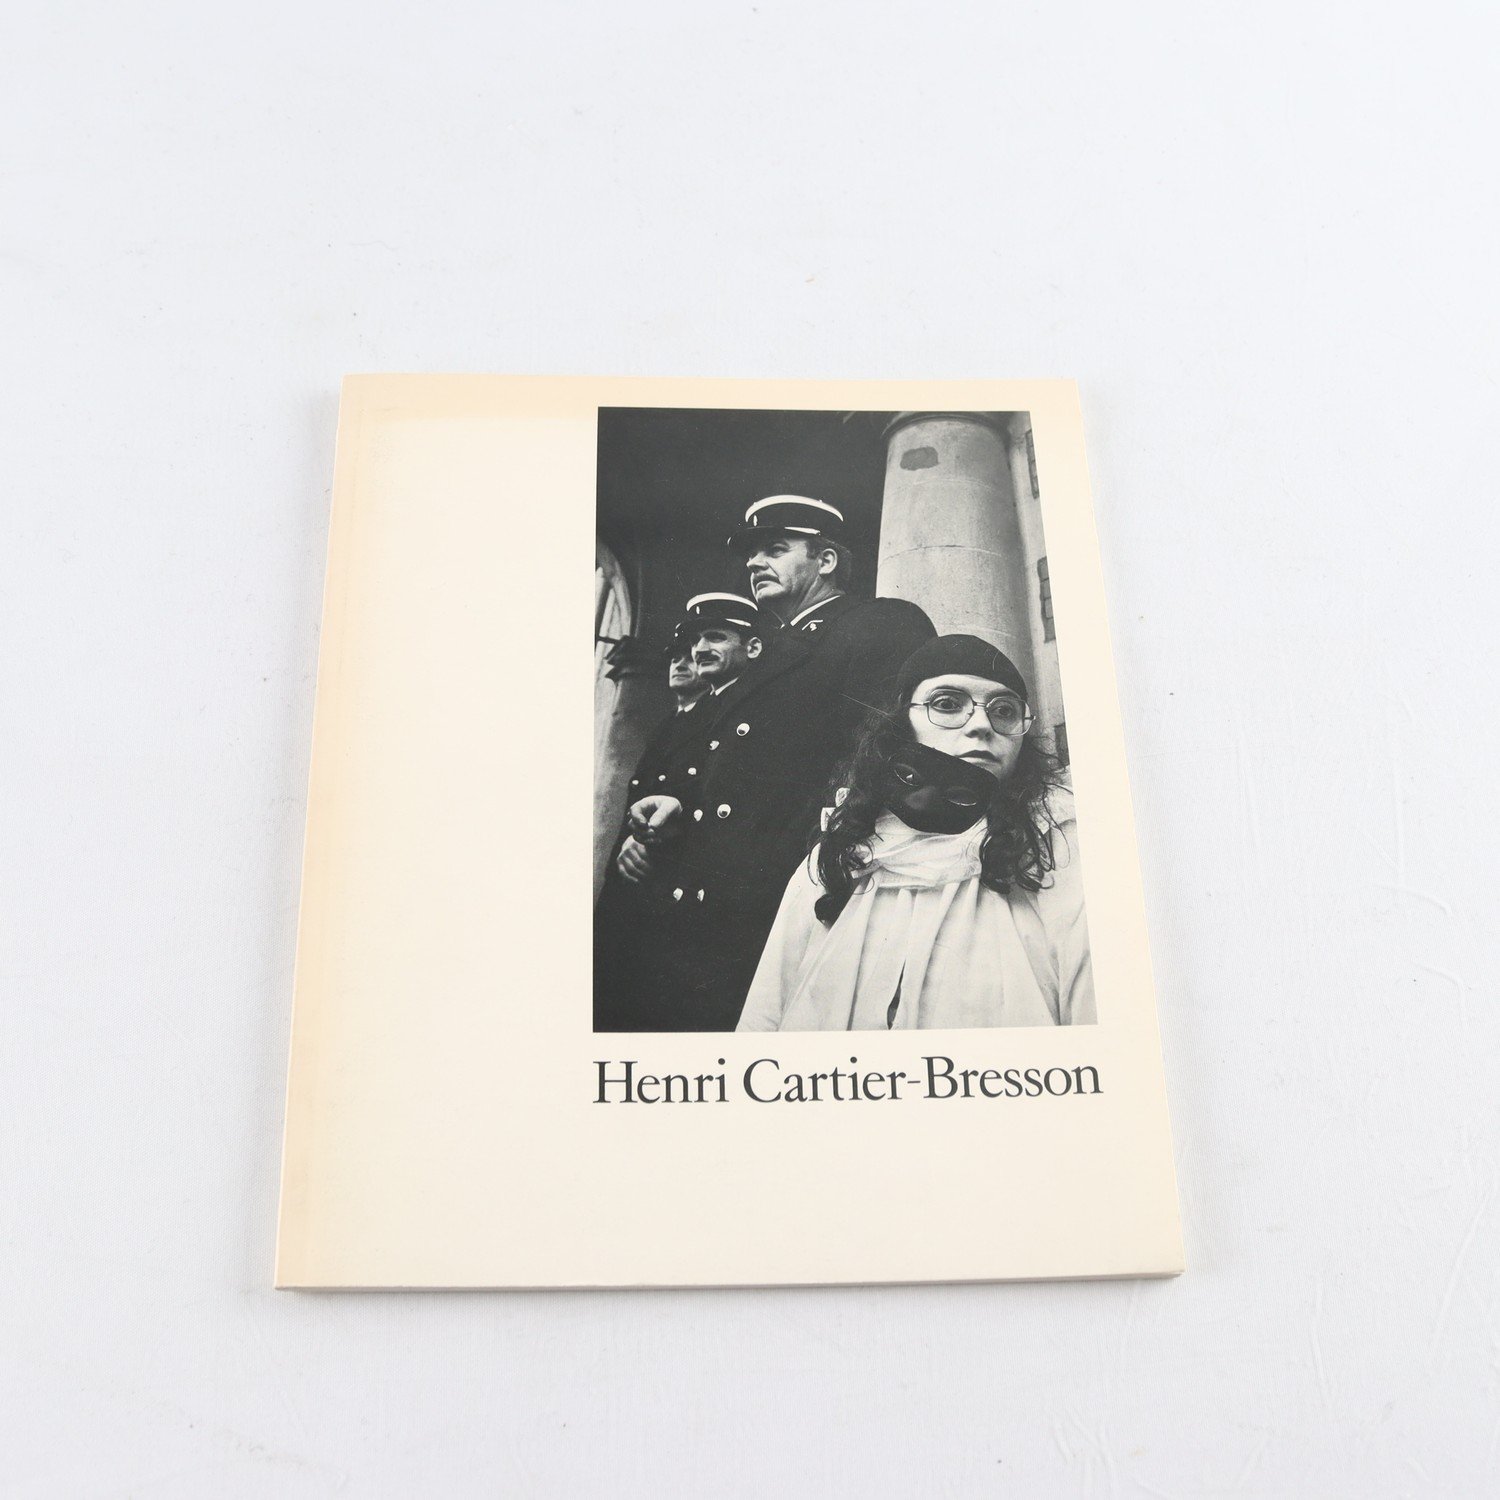 Henri Cartier-Bresson, His archive of 390 photographs from the…